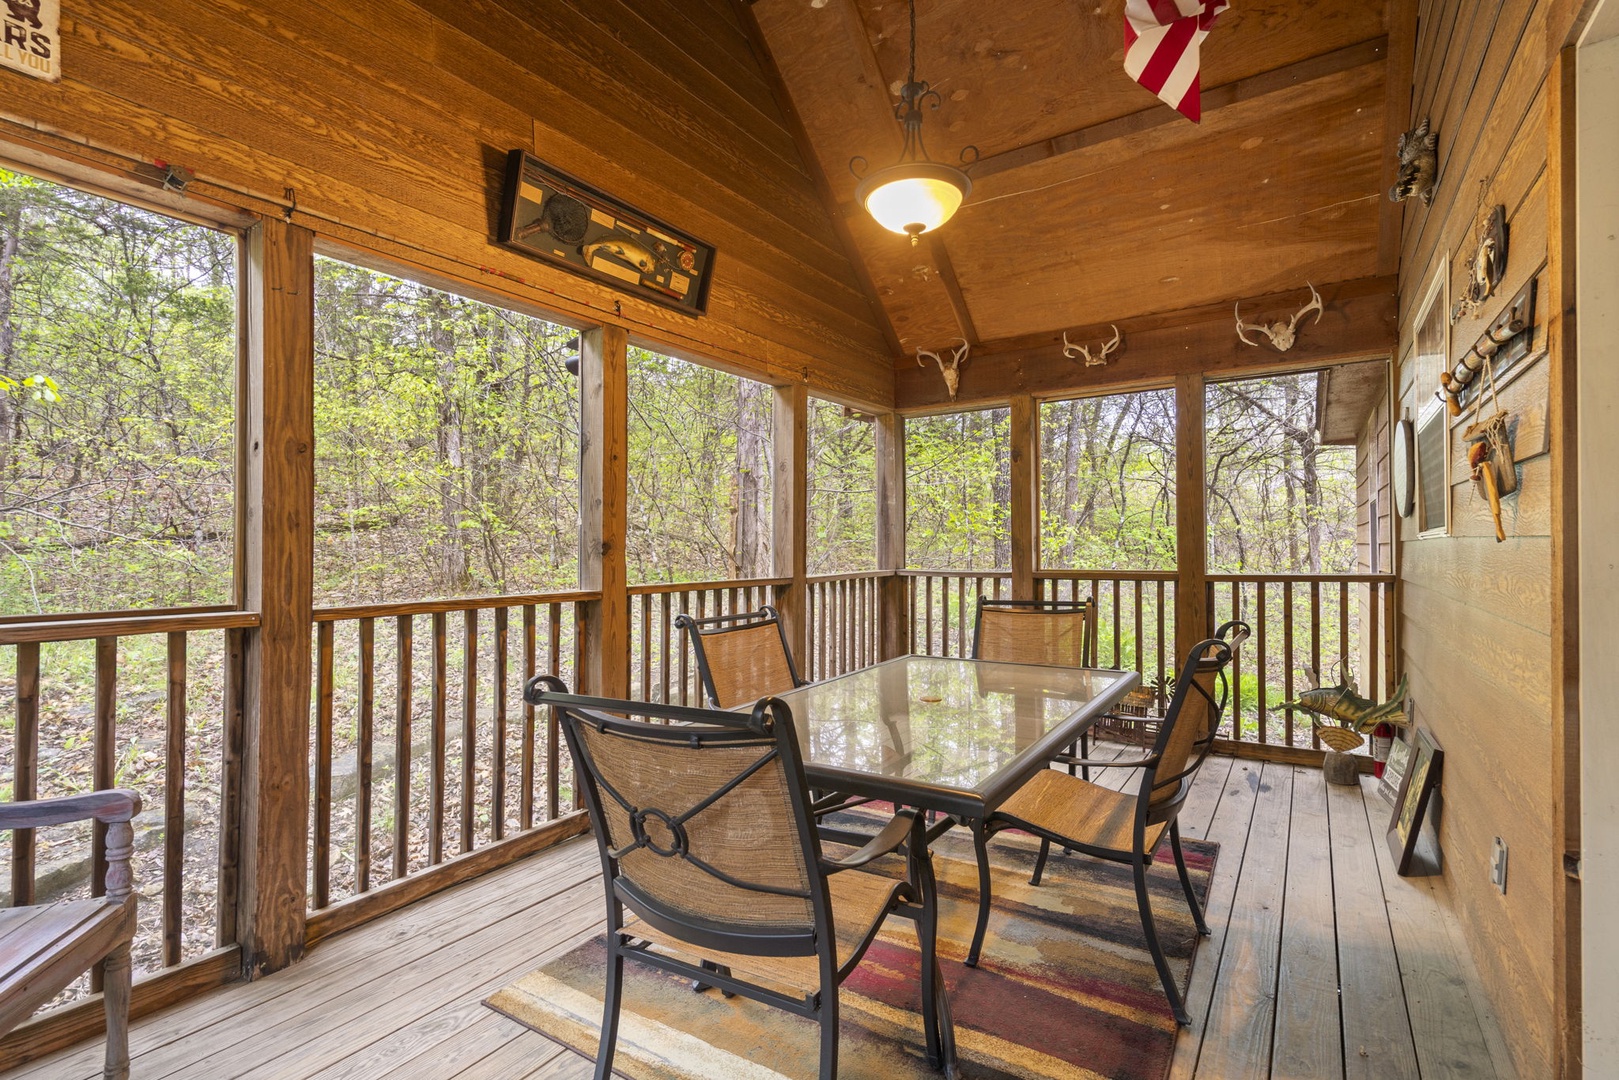 Enjoy alfresco dining or lounge the day away on the screened deck